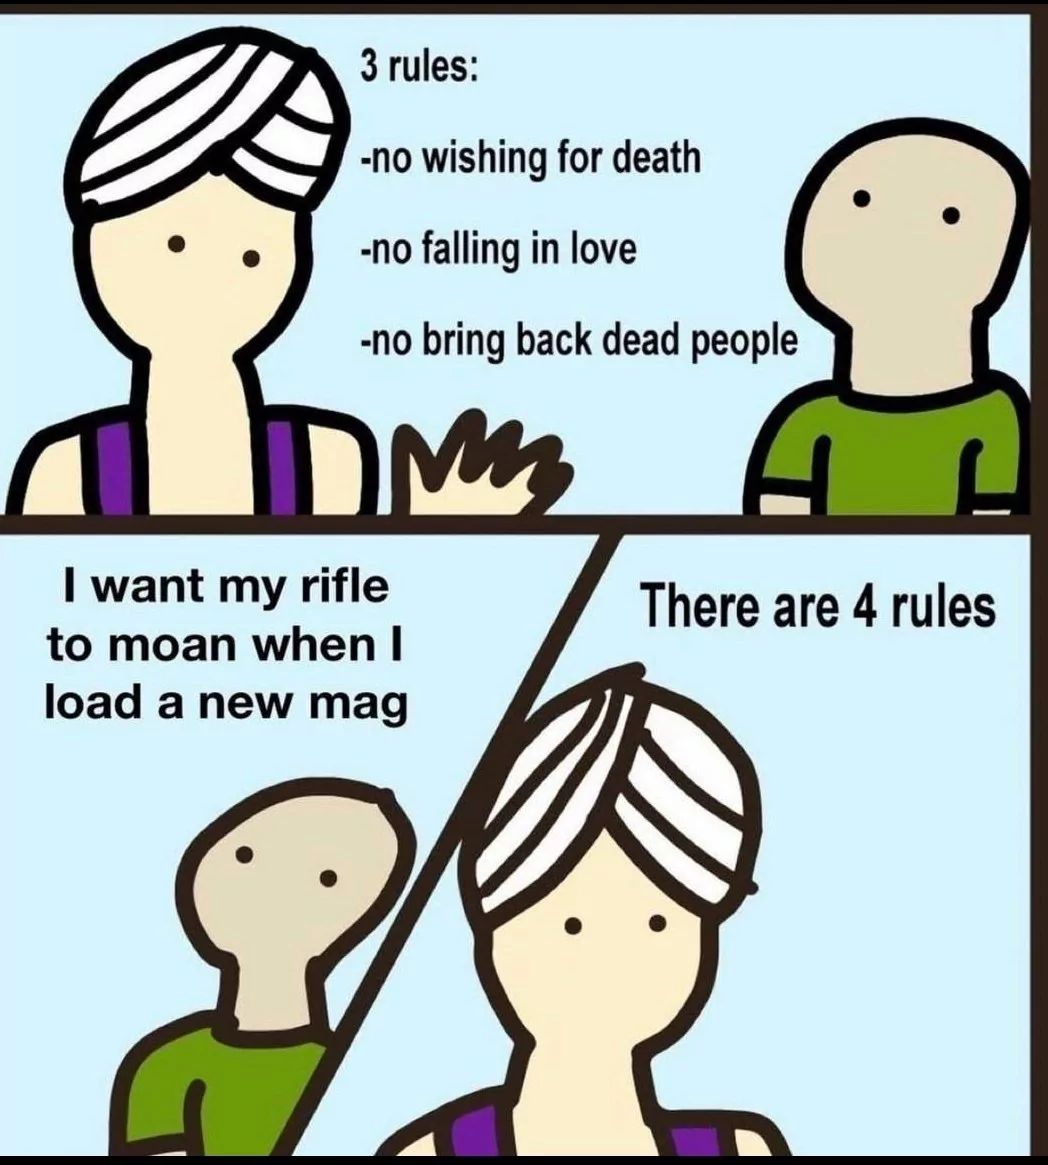 3 rules:
-no wishing for death
-no falling in love
-no bring back dead people
DM
I want my rifle
to moan when I
load a new mag
There are 4 rules